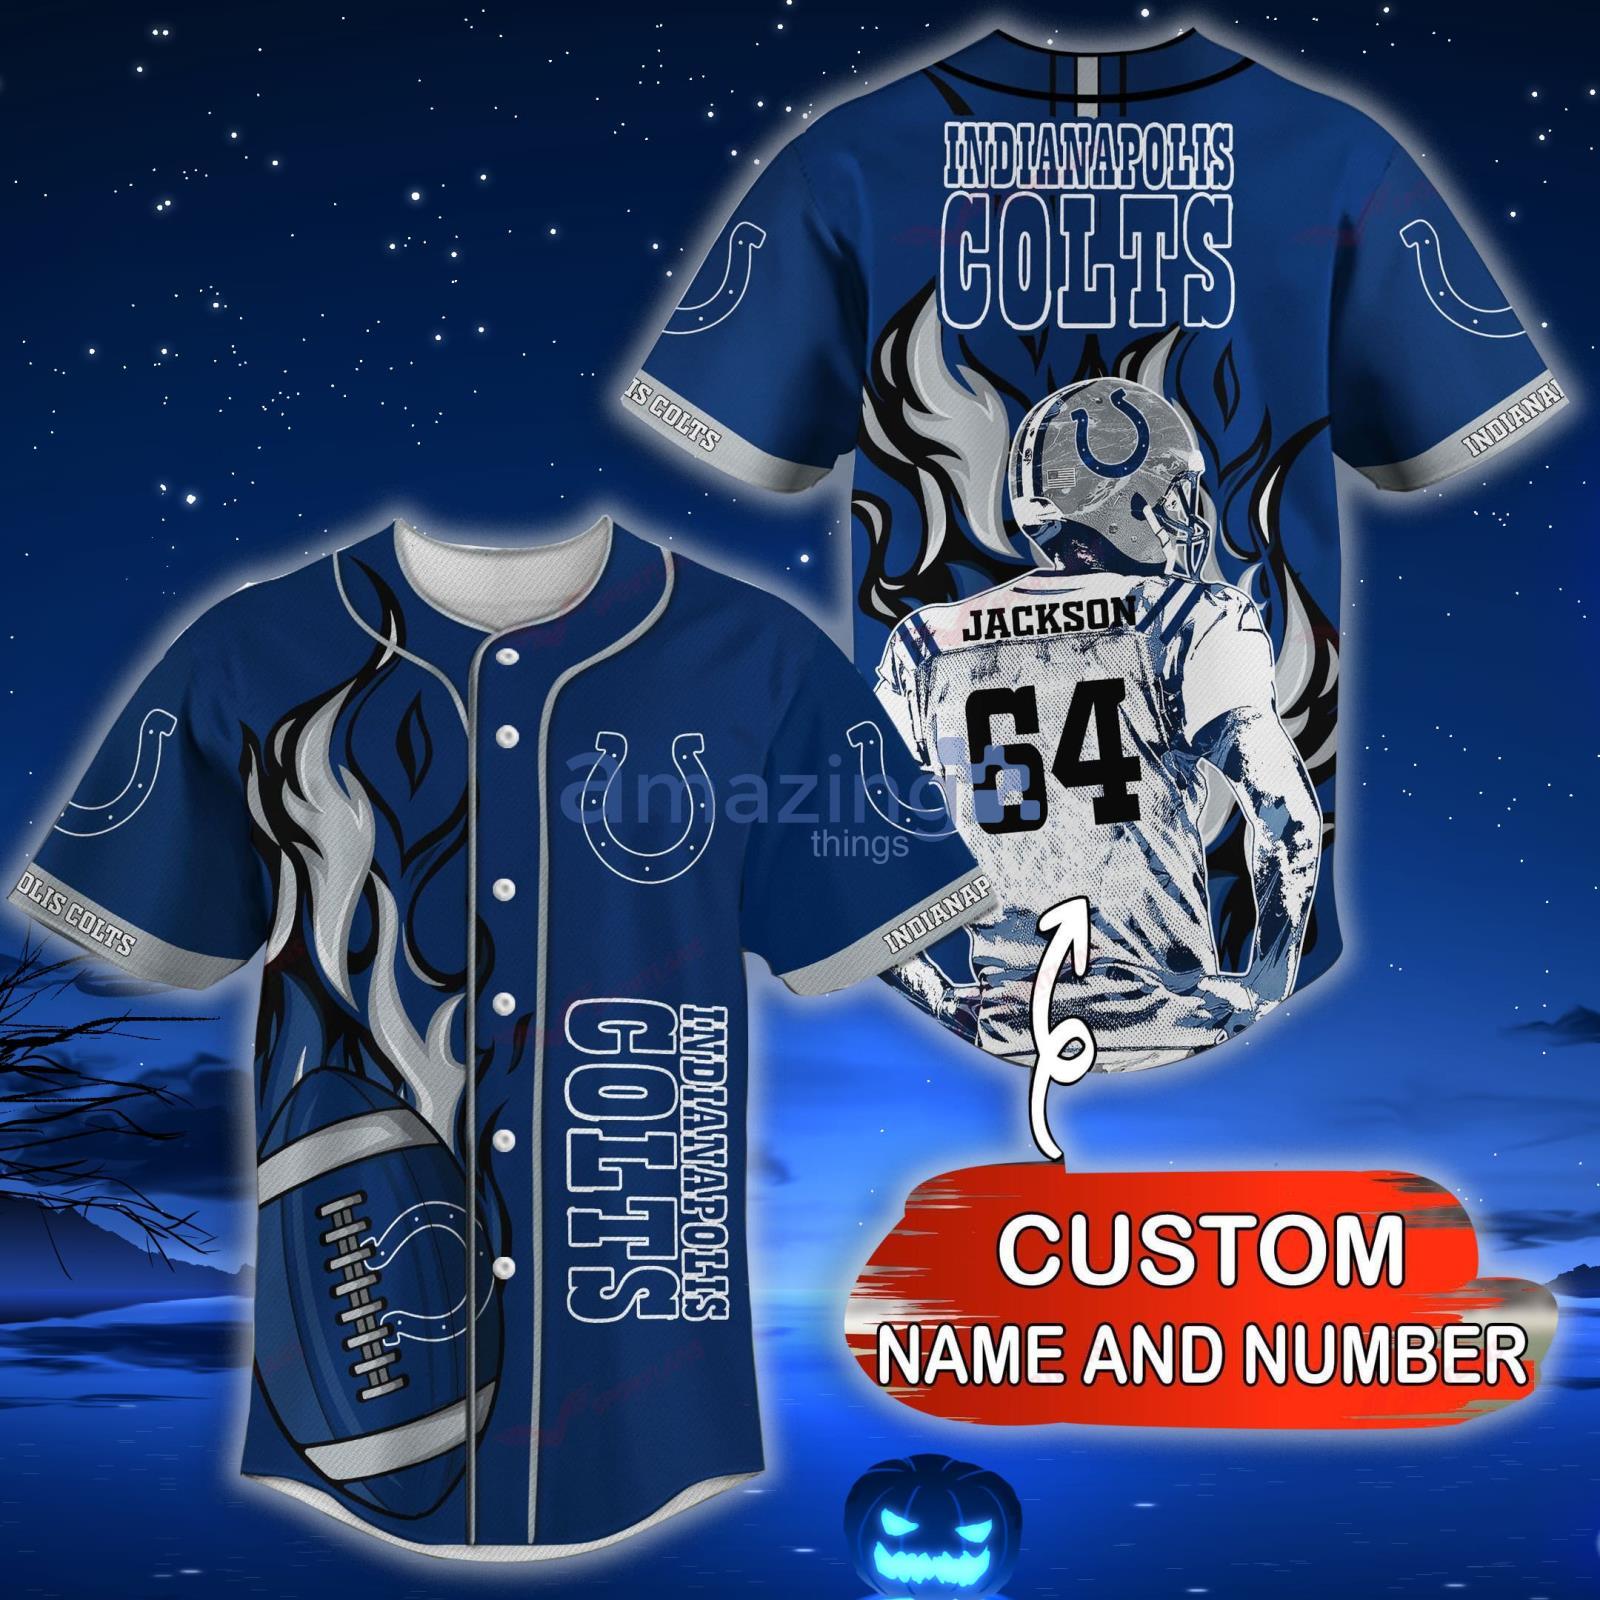 Indianapolis Colts player jersey order